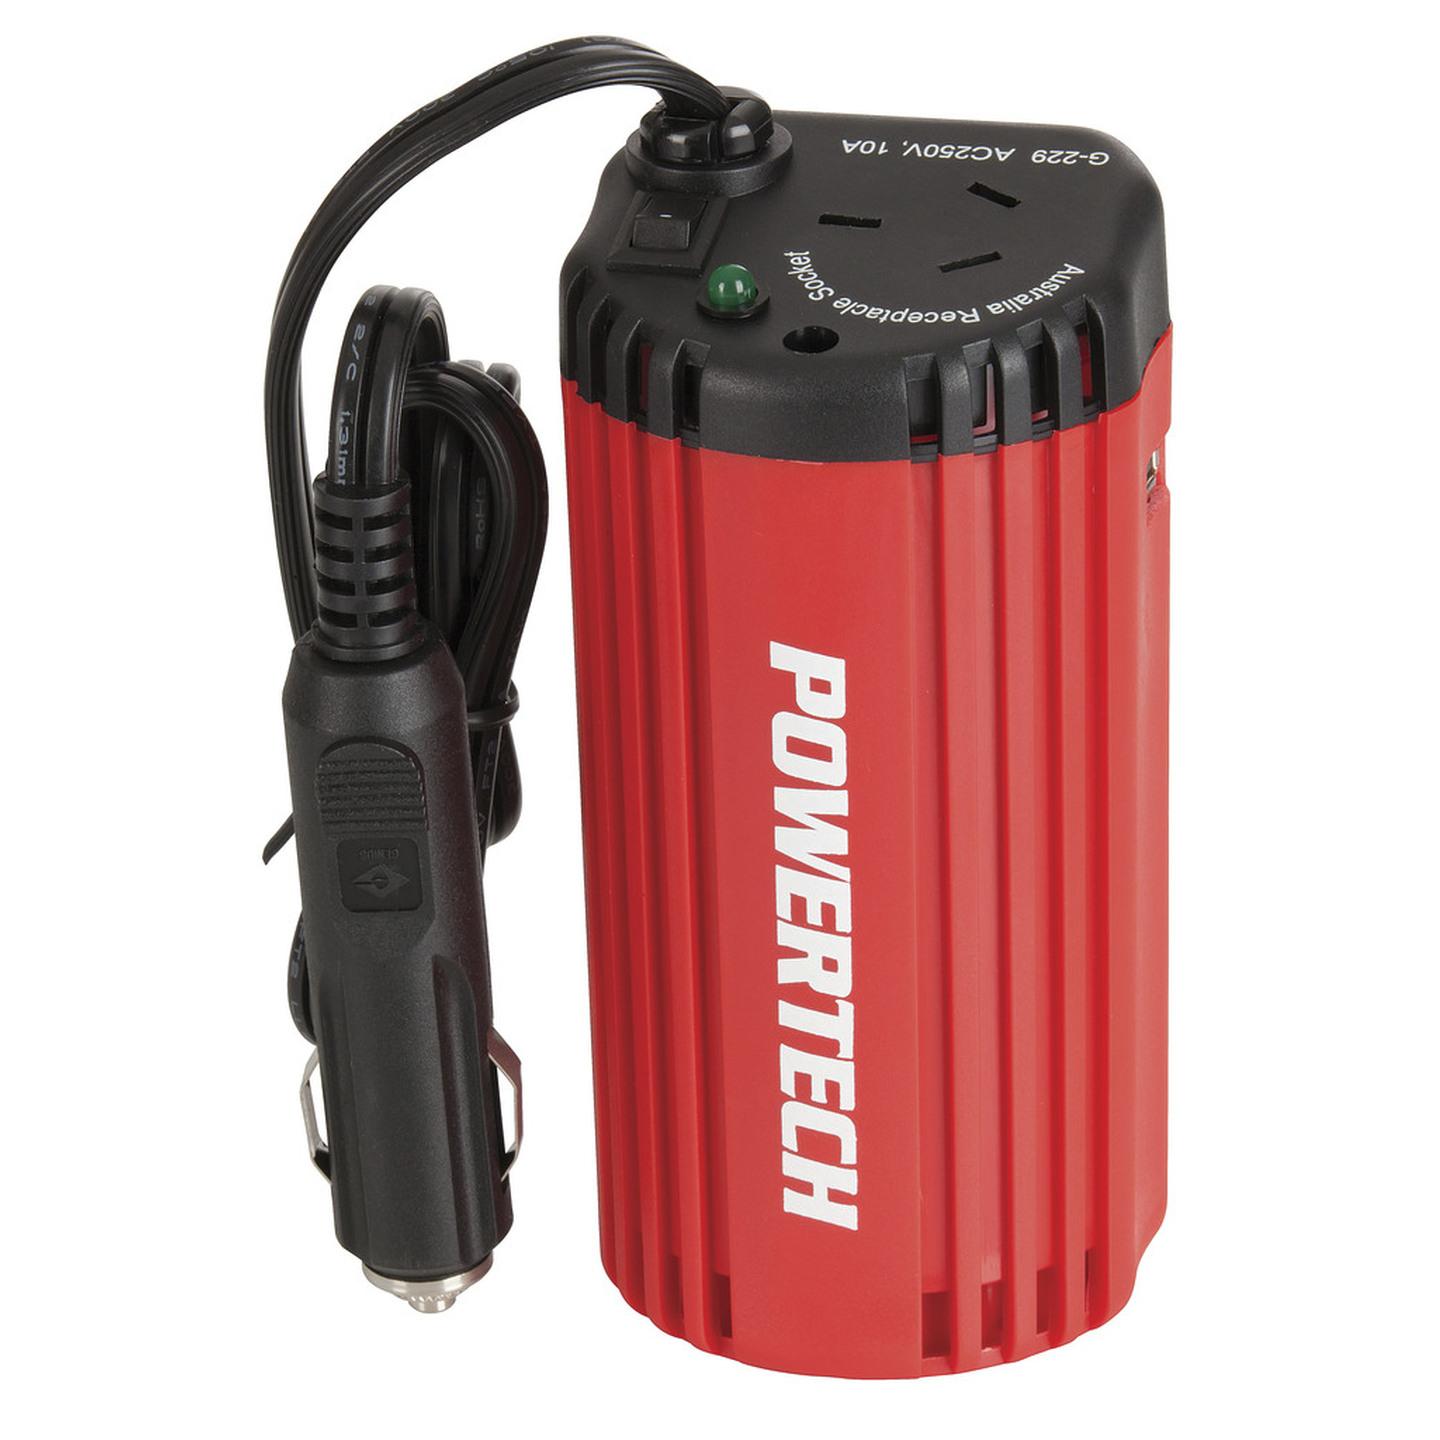 150W Can-Sized Power Inverter with 2.1A USB Output